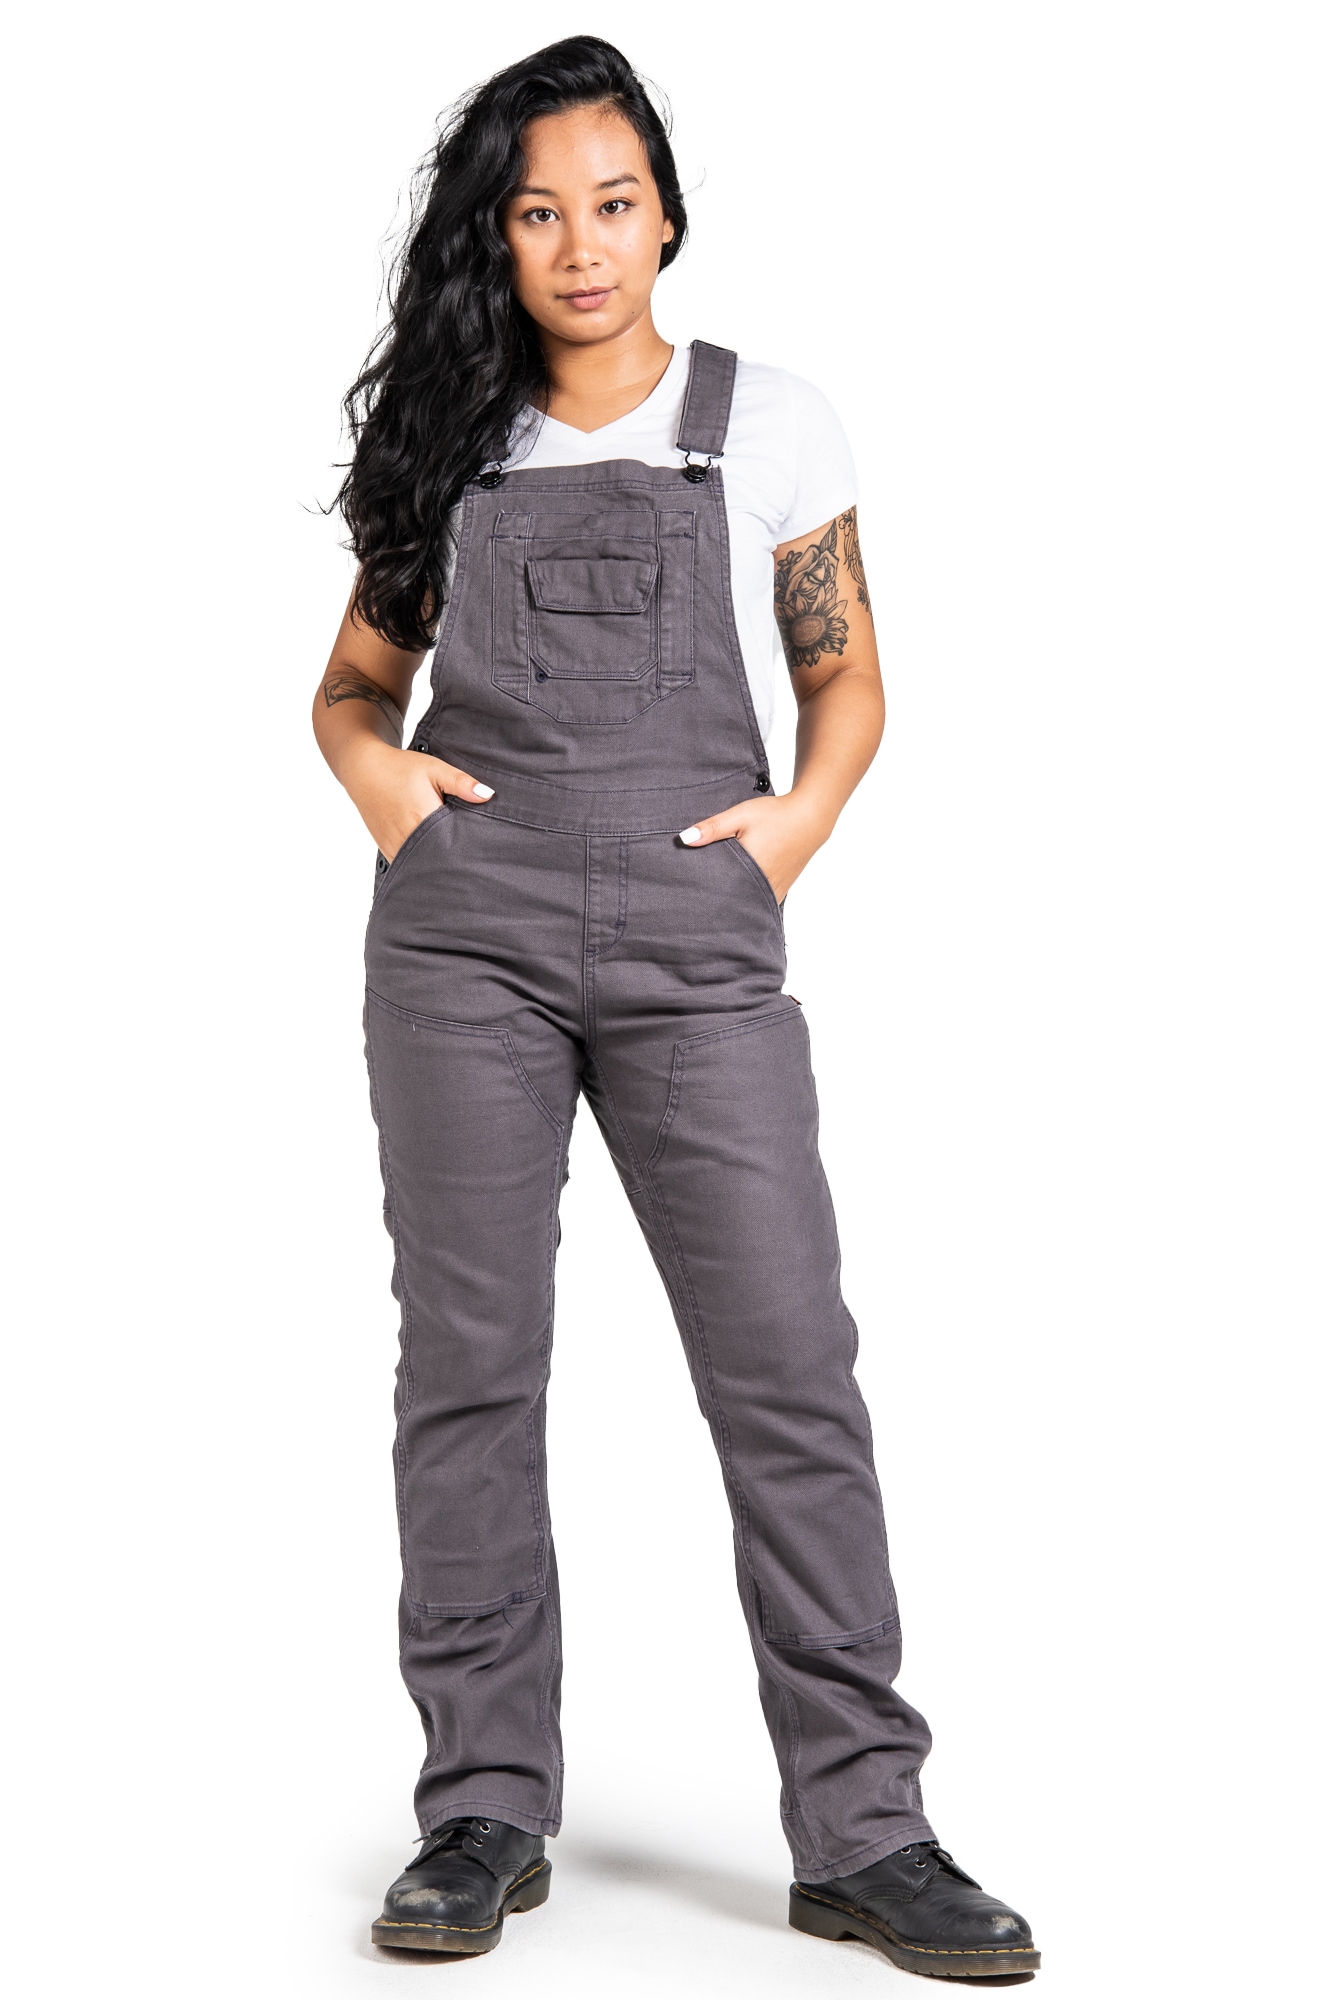 Dovetail Workwear Women's Dark Grey Canvas Overall in the